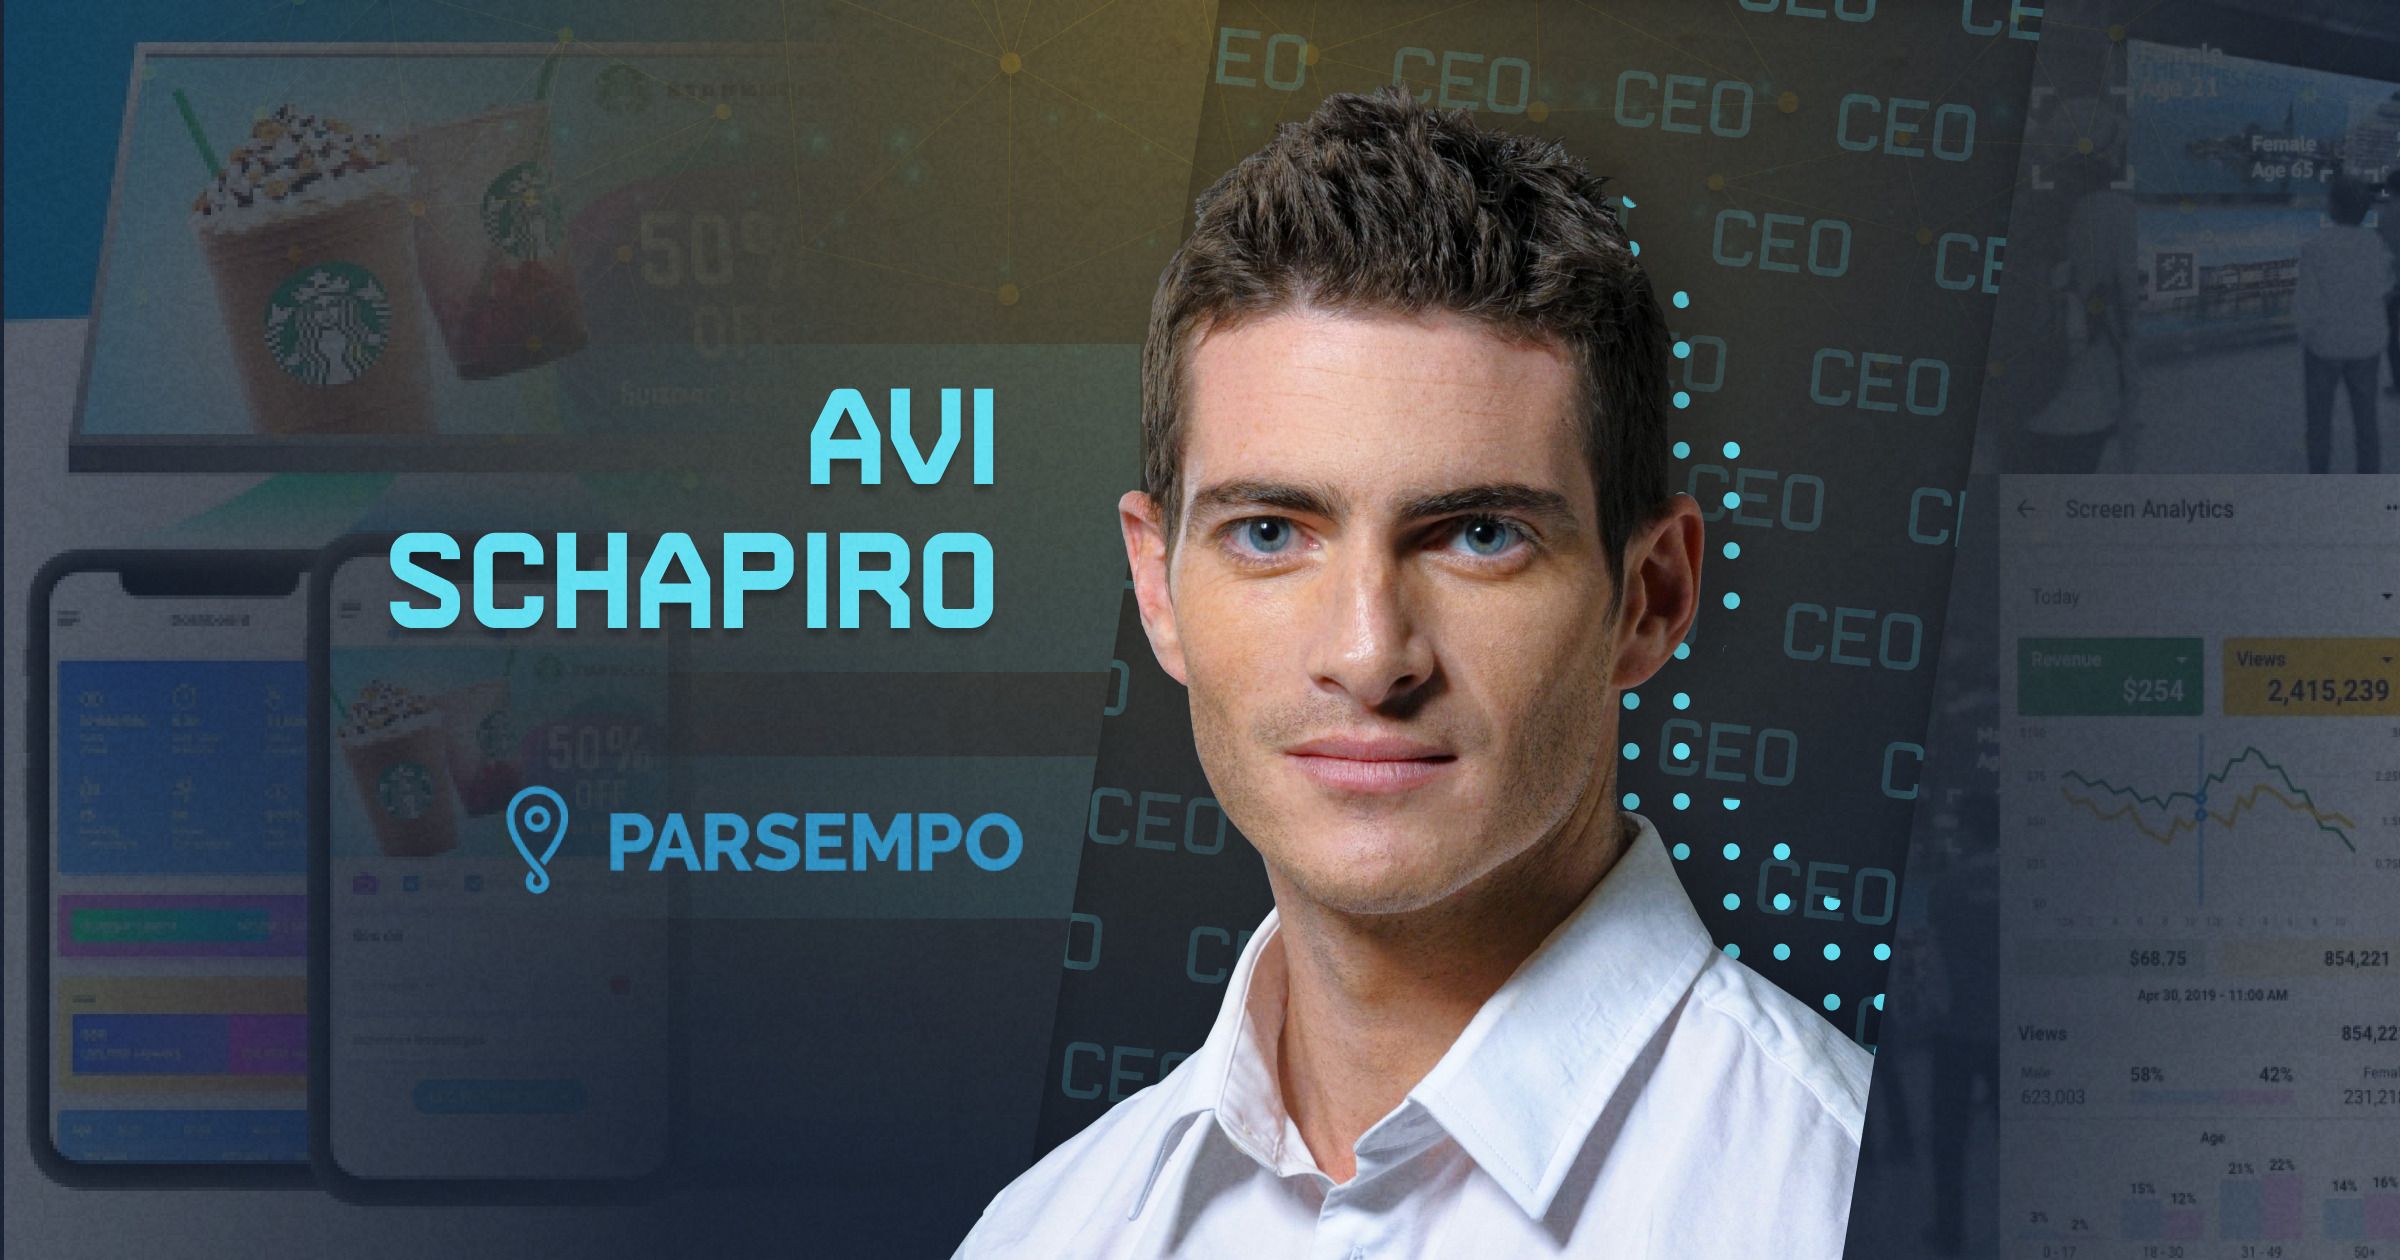 Parsempo CEO Avi Schapiro: Automating and Democratizing the Digital Signage Industry with AI